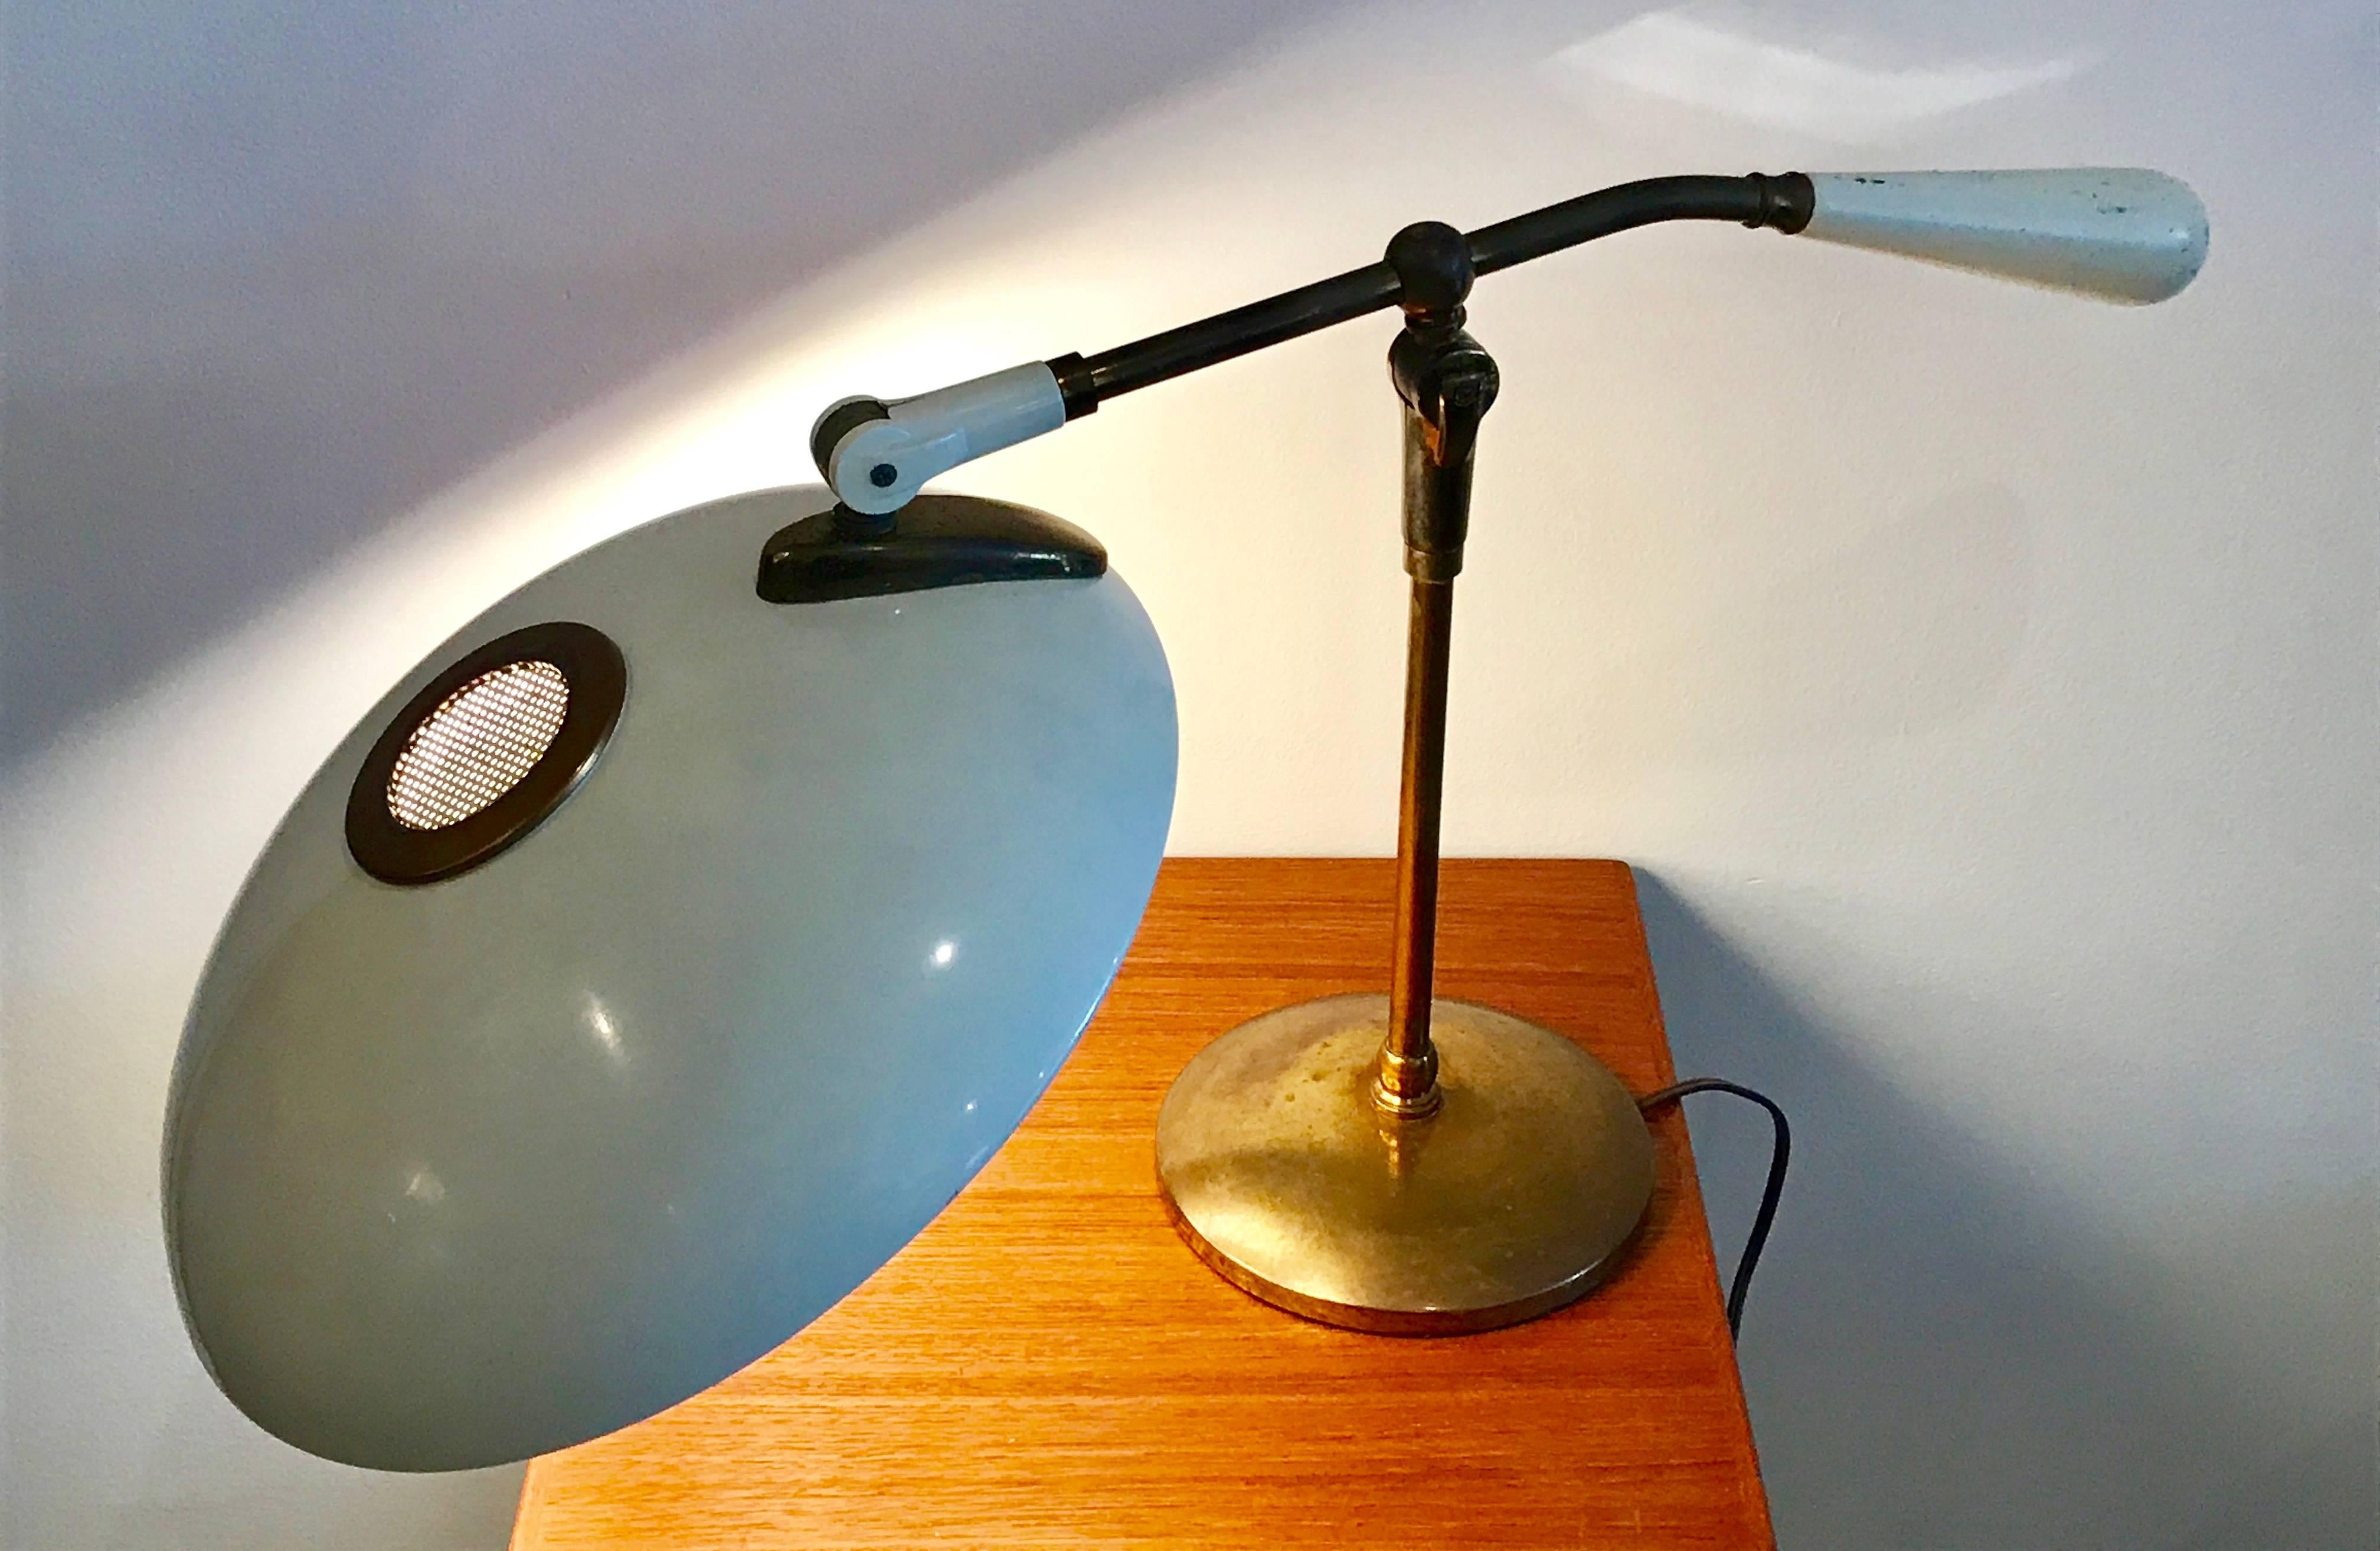 Iconic desk lamp designed by Gerald Thurston for Lightolier, all original, no missing parts or dents, great patina on brass, minor flaking on weighted handle, please see photos. Works great but professional re-wiring recommended.